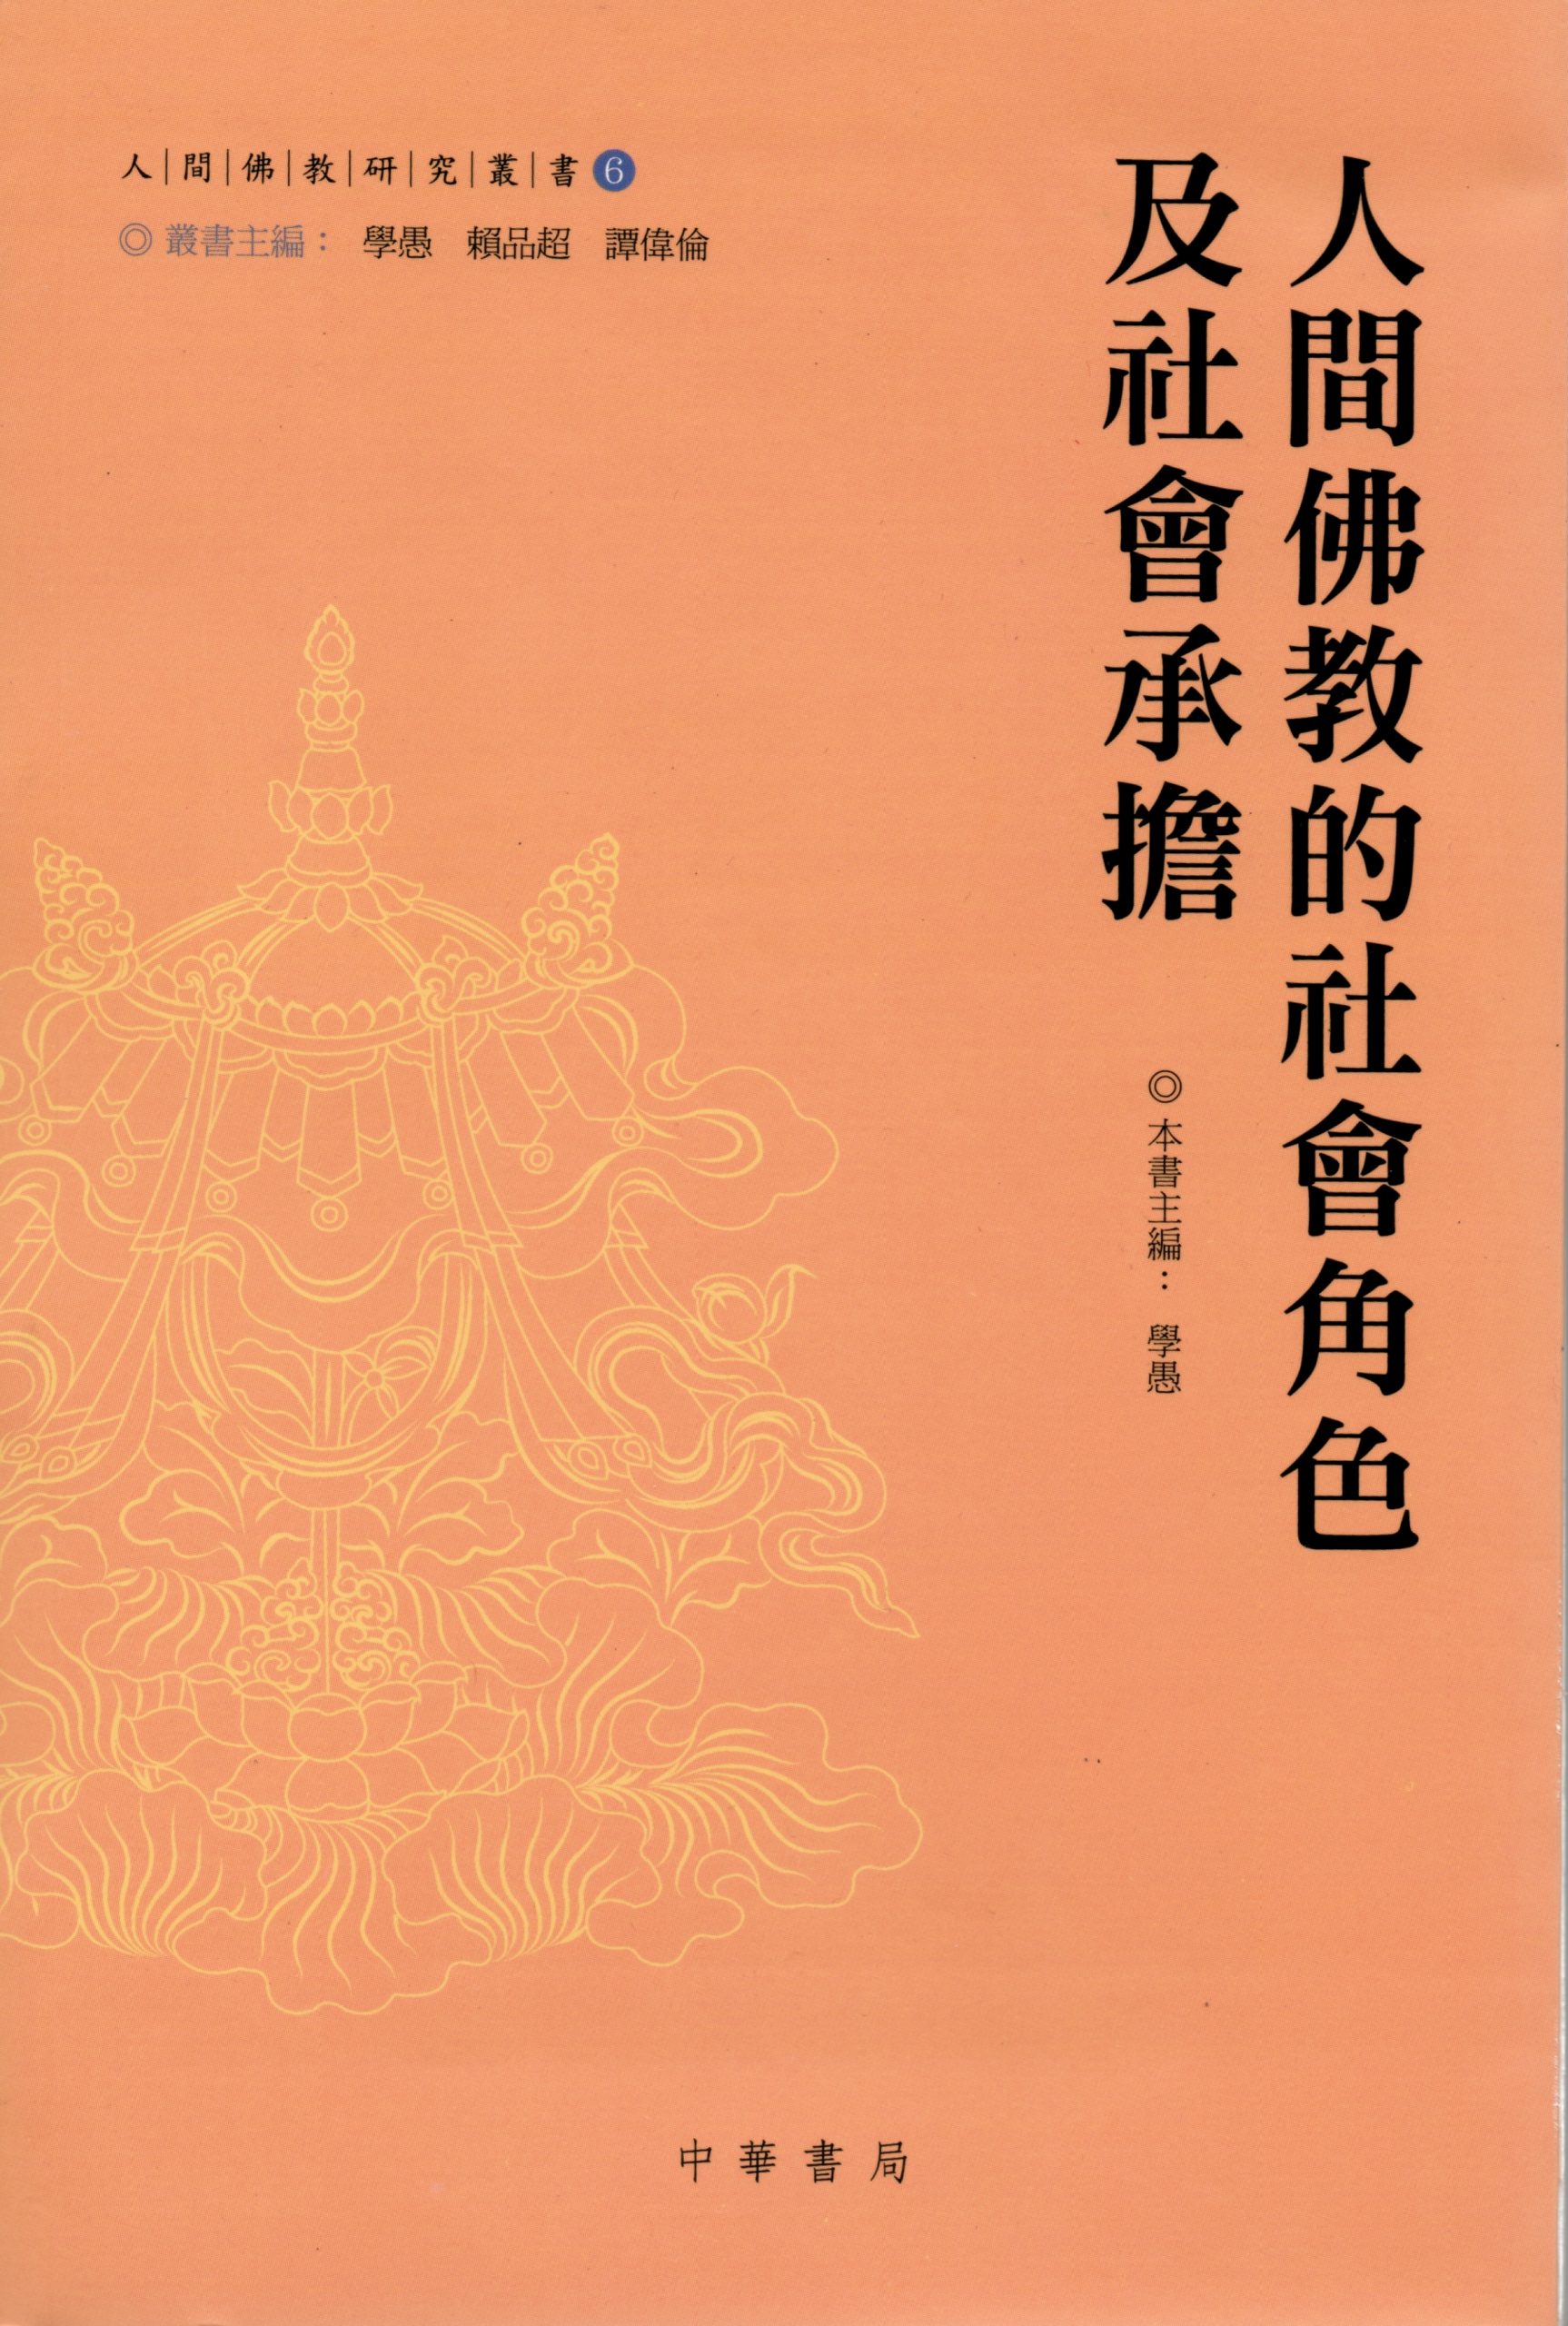 (6) The Social Role and Social Commitment of Humanistic Buddhism